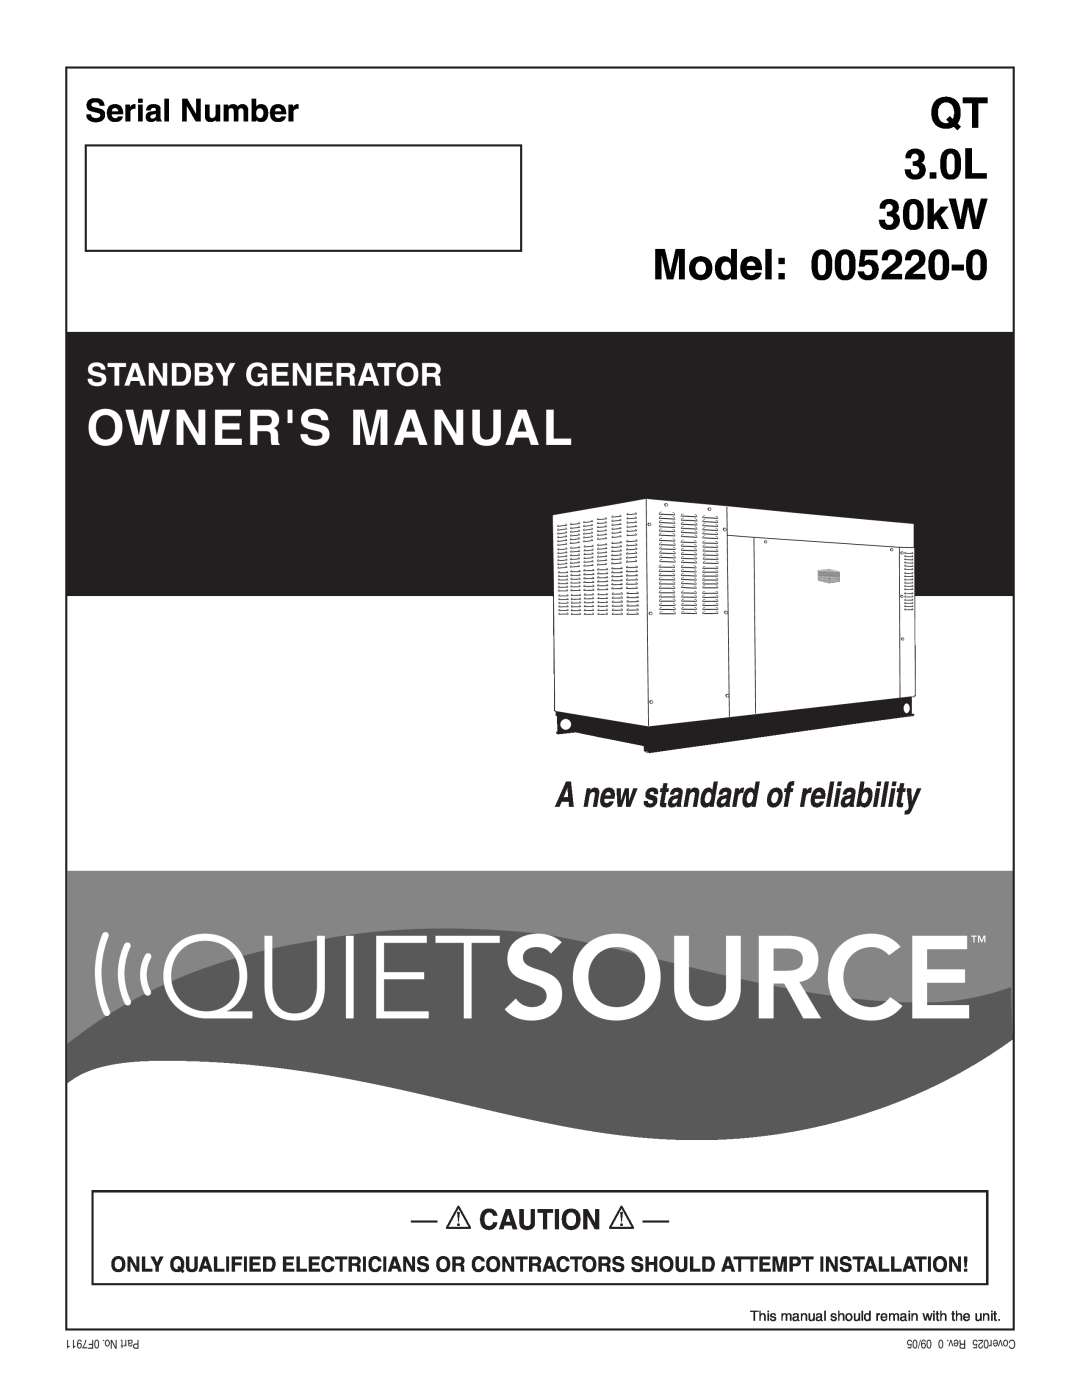 Generac Power Systems 005220-0 owner manual Model, QT 3.0L 30kW, A new standard of reliability, Serial Number 